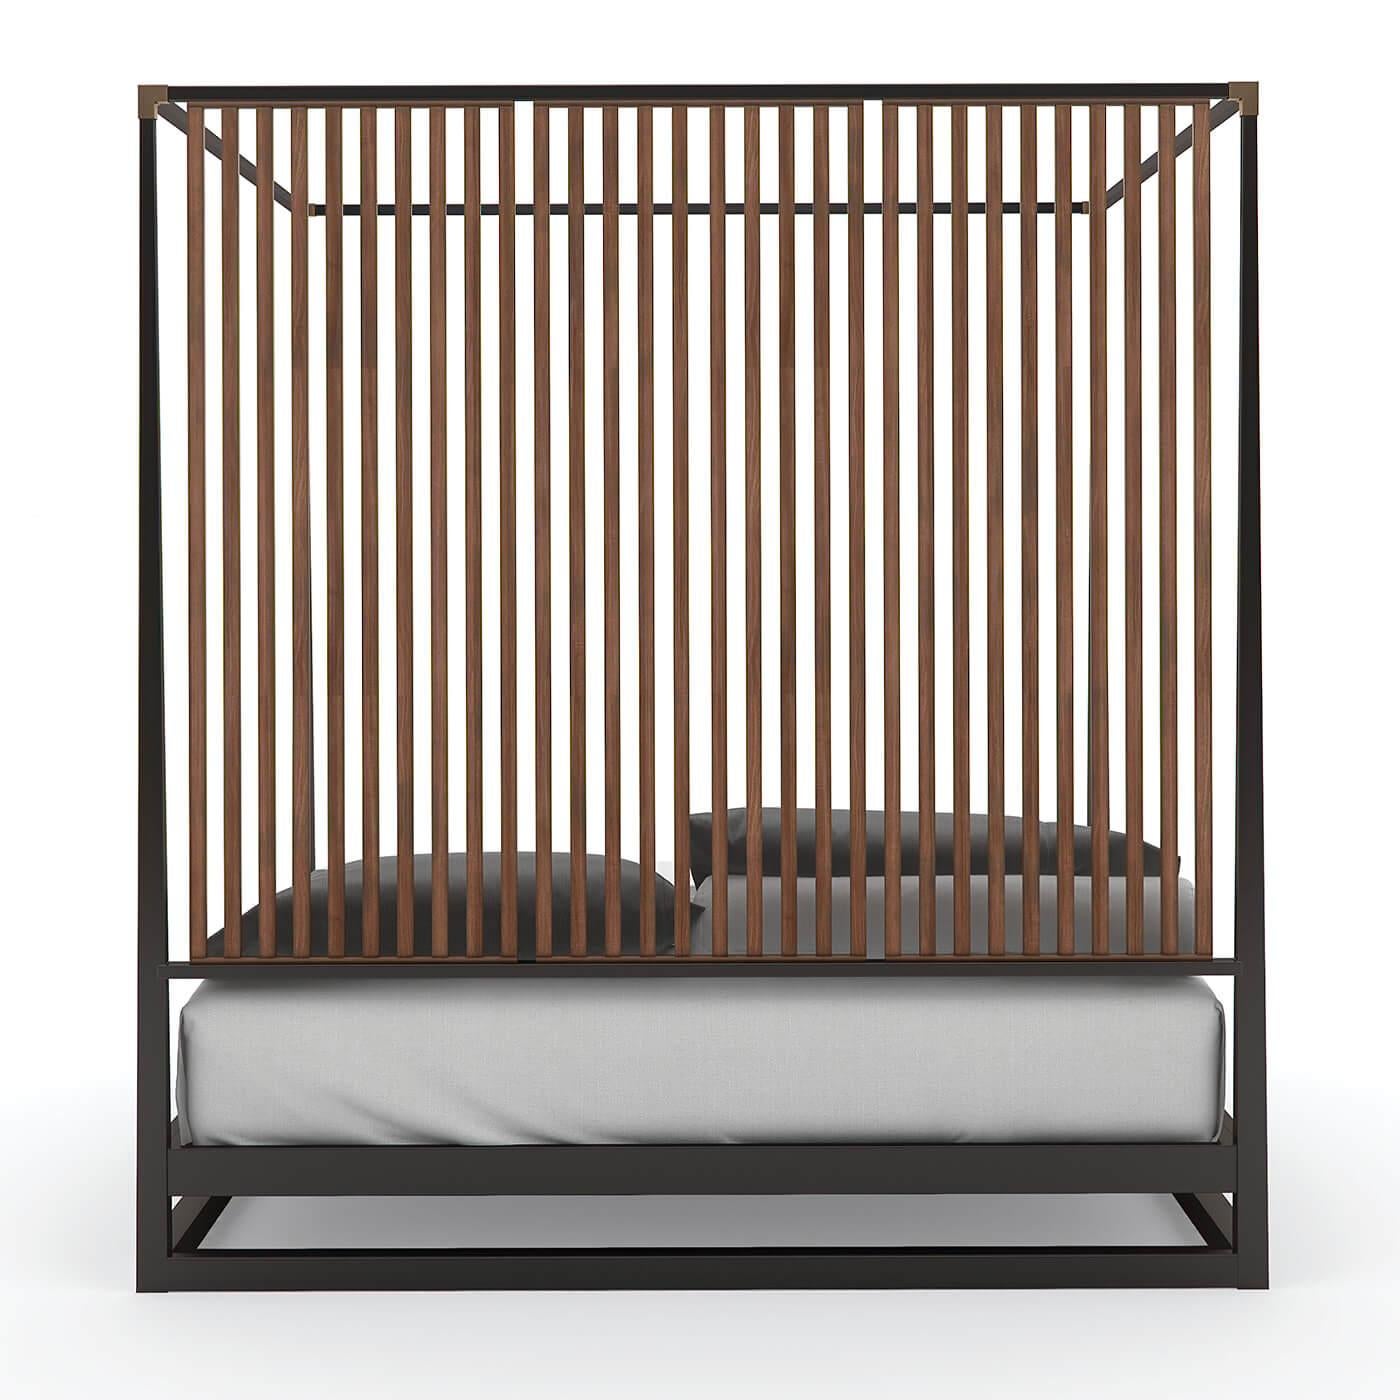 Asian Mid Century Modern Canopy Bed - California King